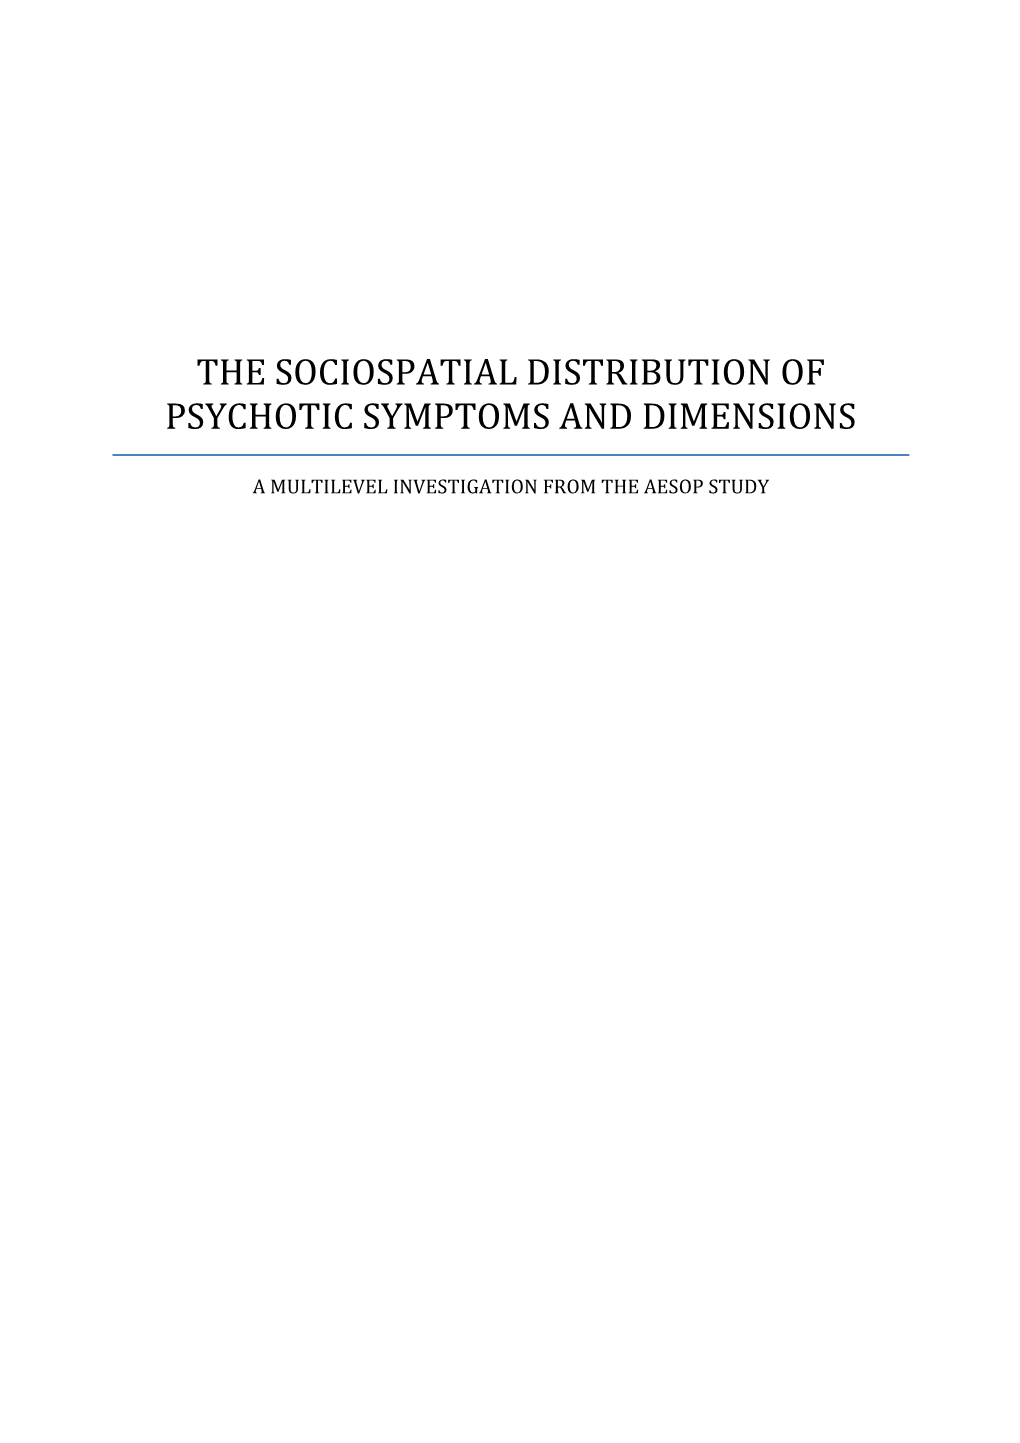 The Sociospatial Distribution of Psychotic Symptoms and Dimensions